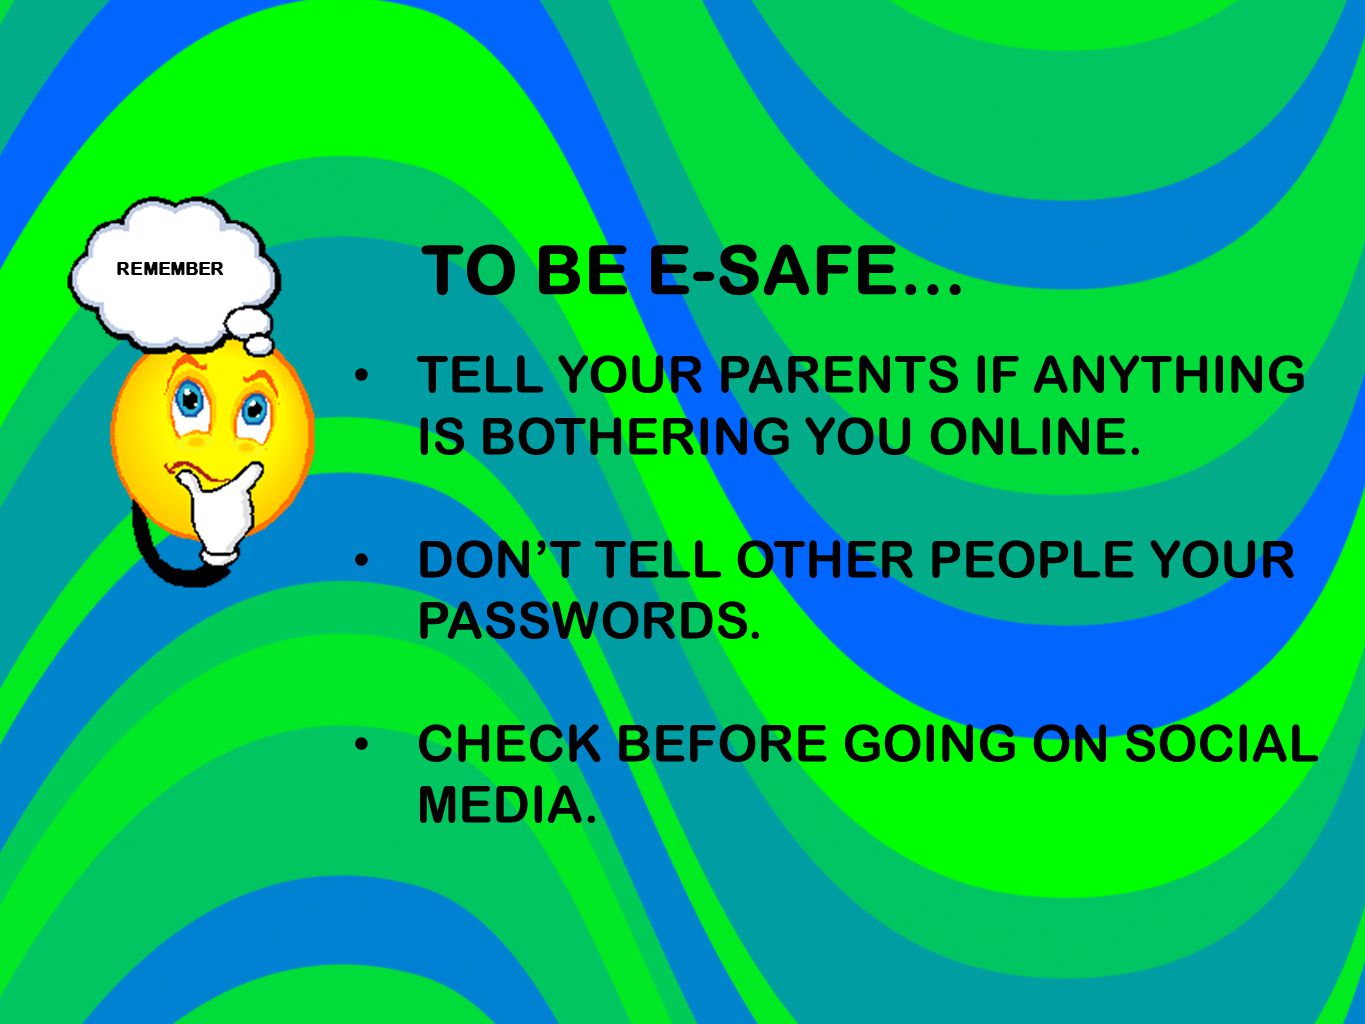 TELL YOUR PARENTS IF ANYTHING IS BOTHERING YOU ONLINE.